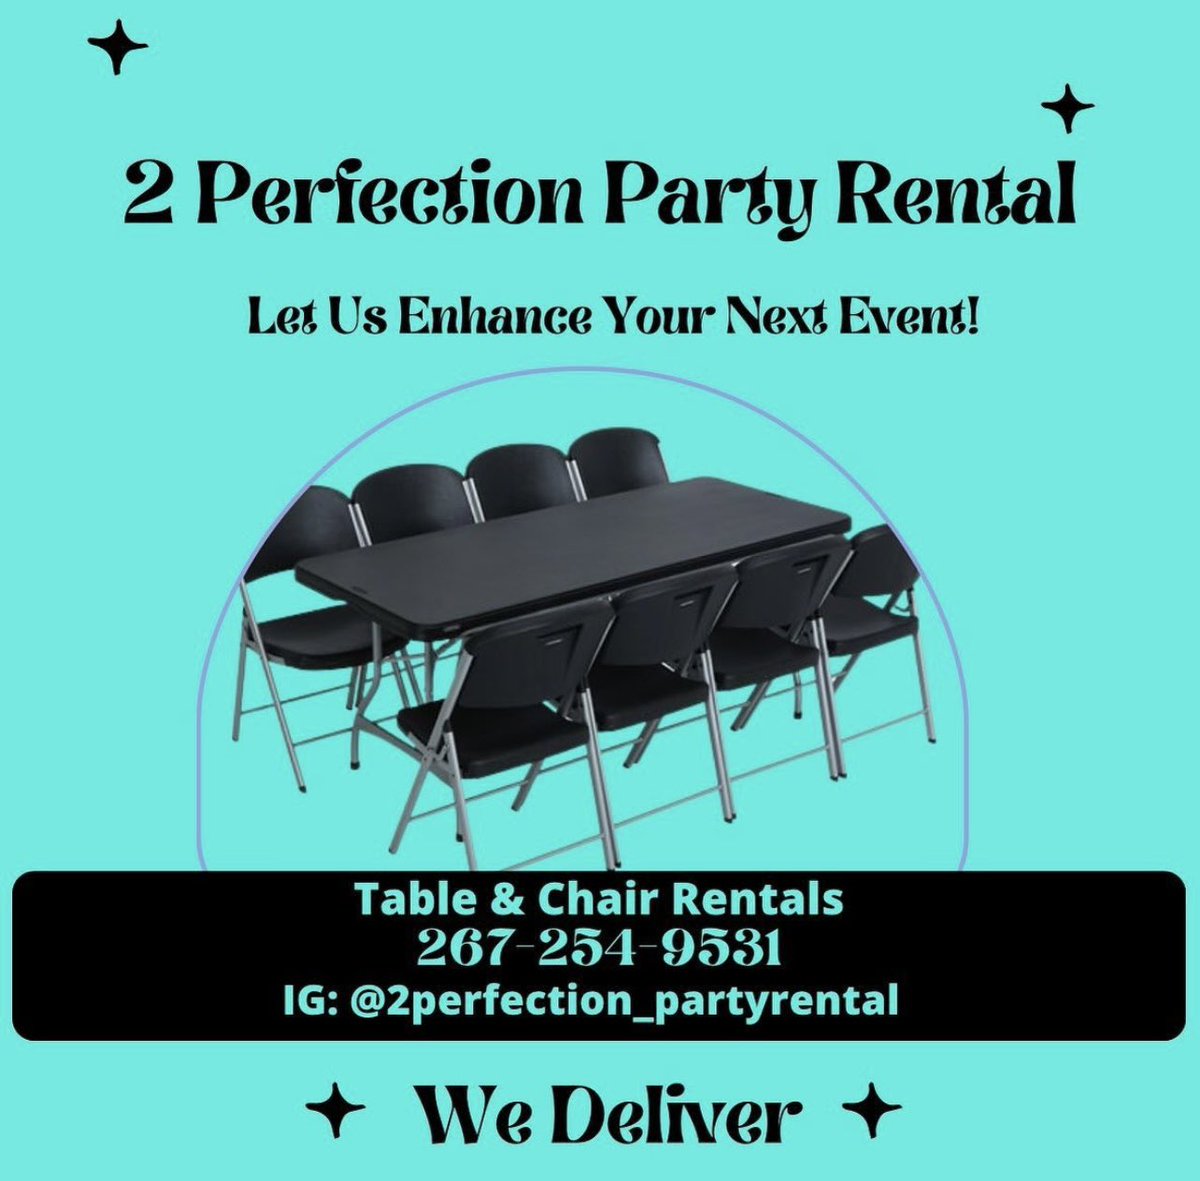 Rent our tables and chairs for your events #prom #promsendoff #graduation #graduationparty #partyrental #tableandchairs #table #chair #tablerentals #chairrentals #entertainment #events #popupshop #birthdayparty #genderreveal #babyshower #corporateevents #bookwithme #philly